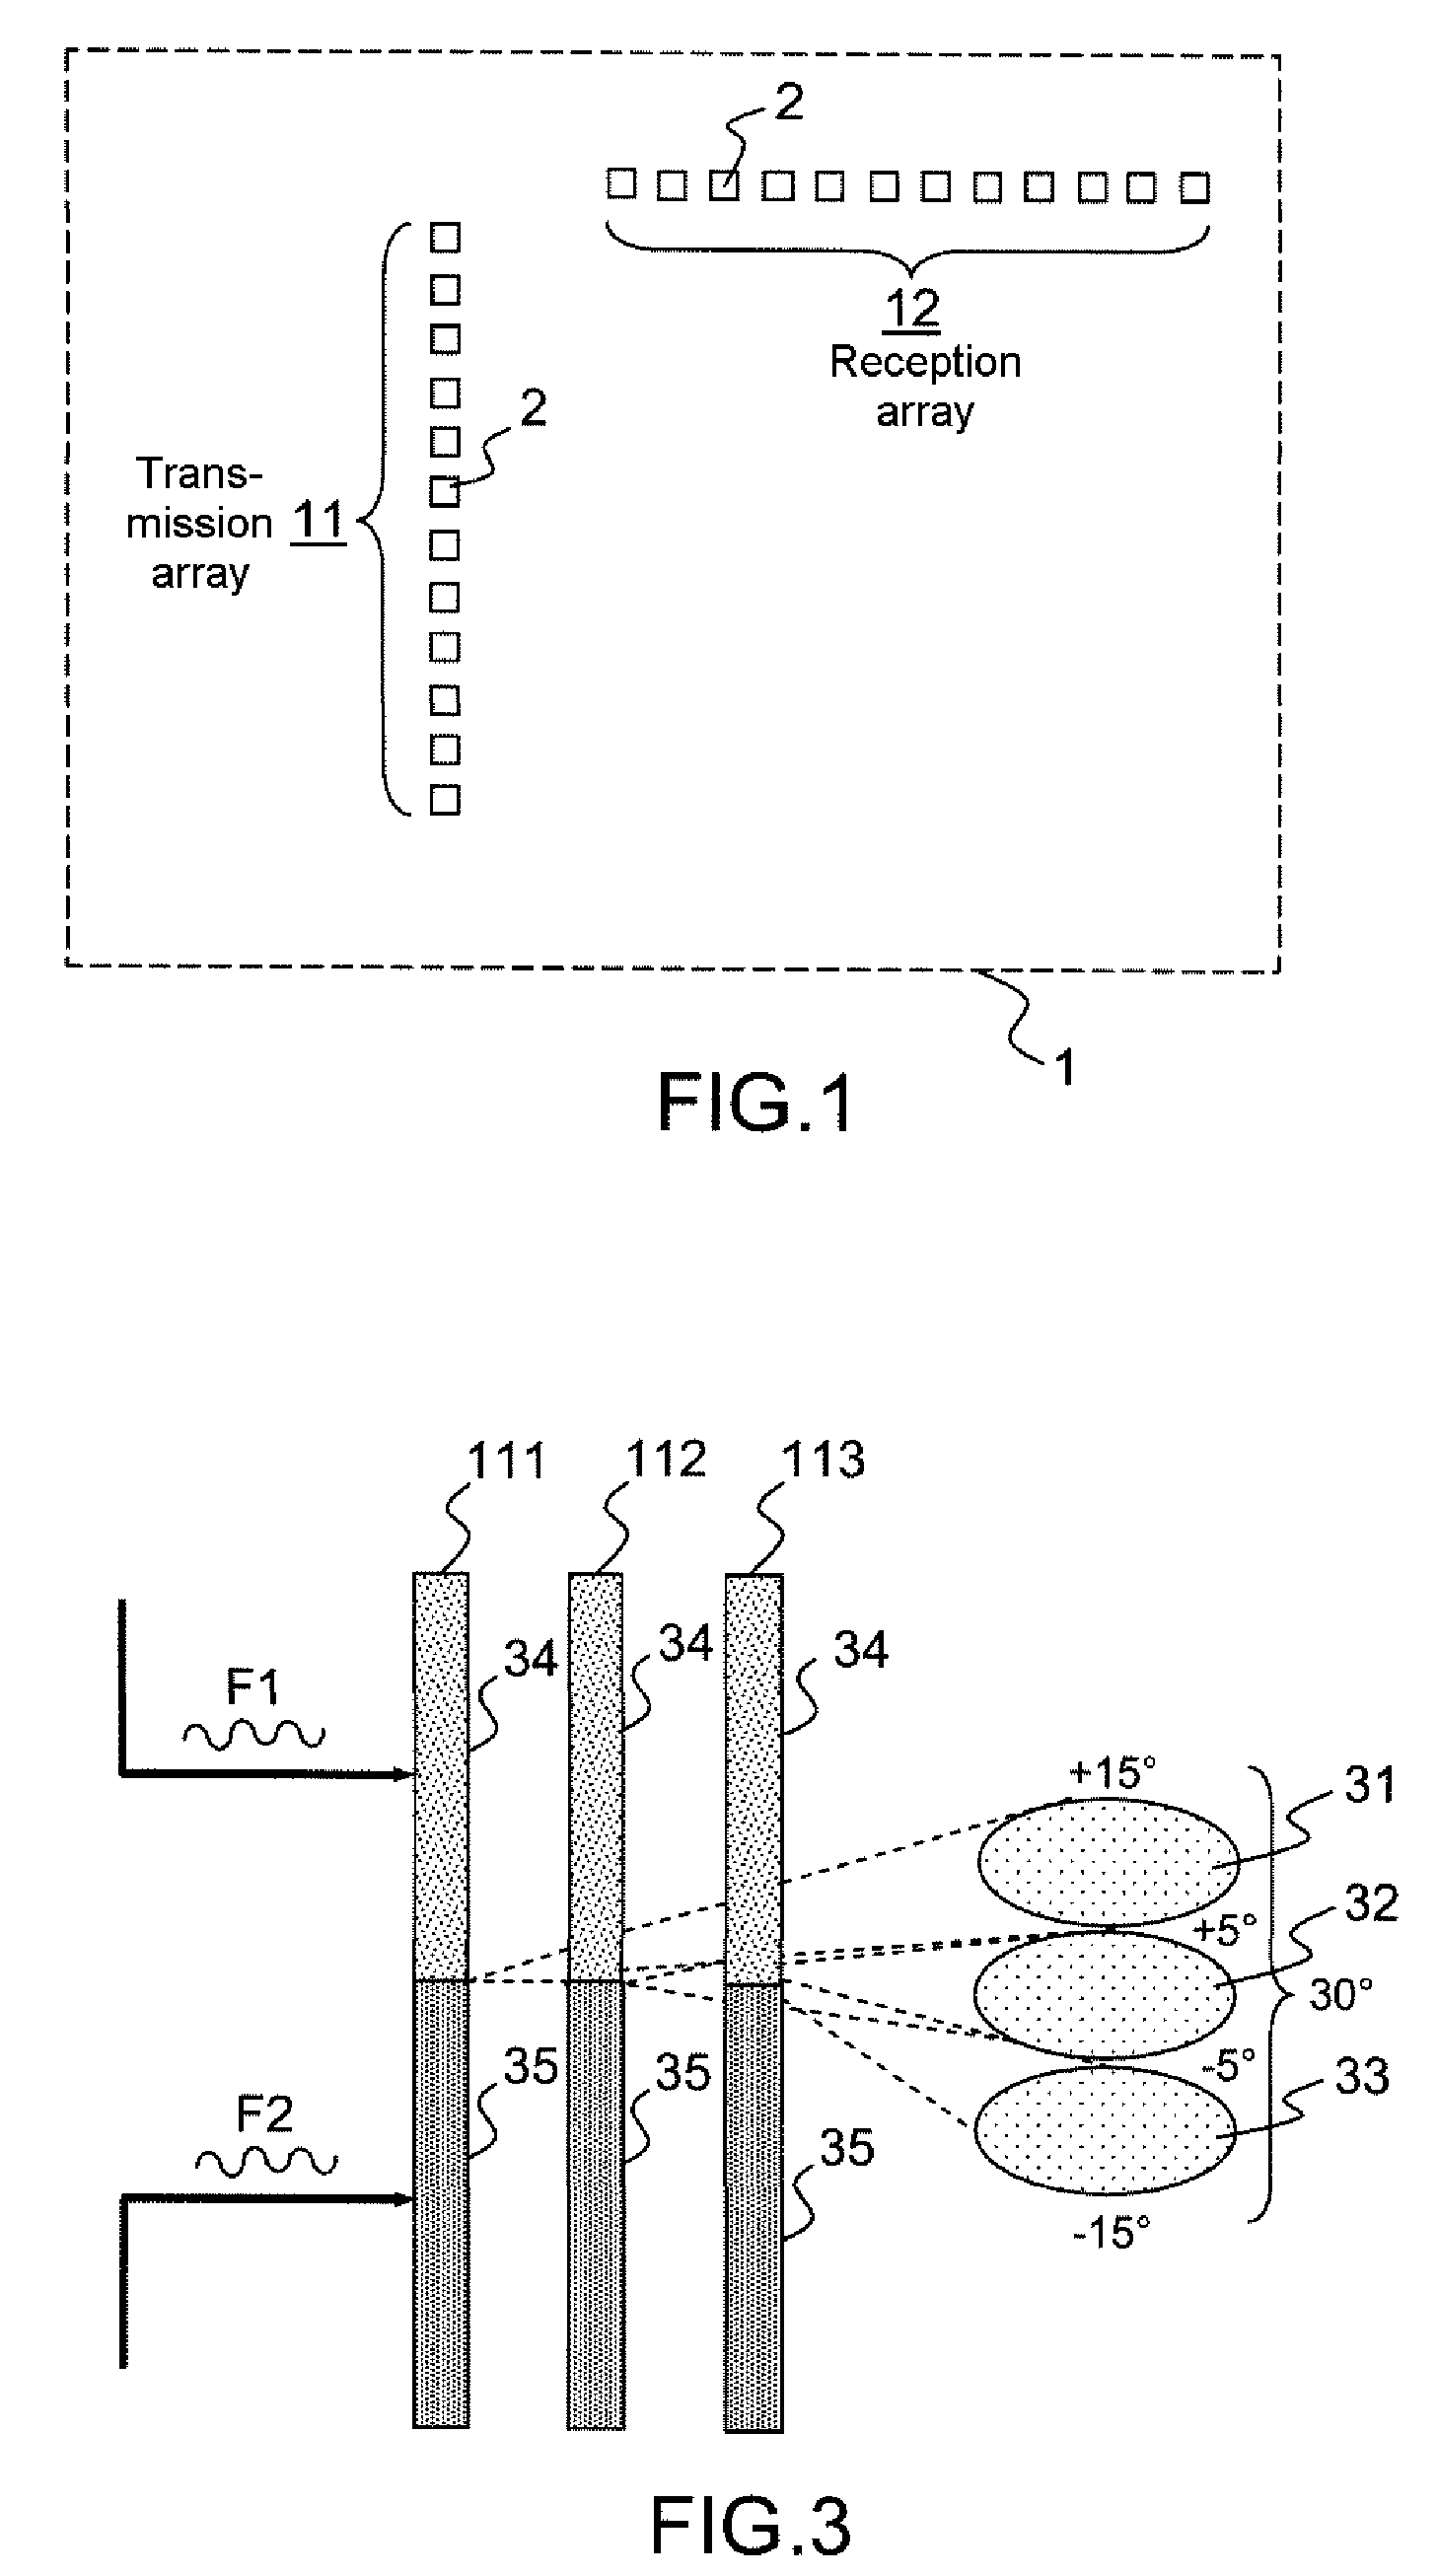 Agile-beam radar notably for the obstacle 'sense and avoid' function